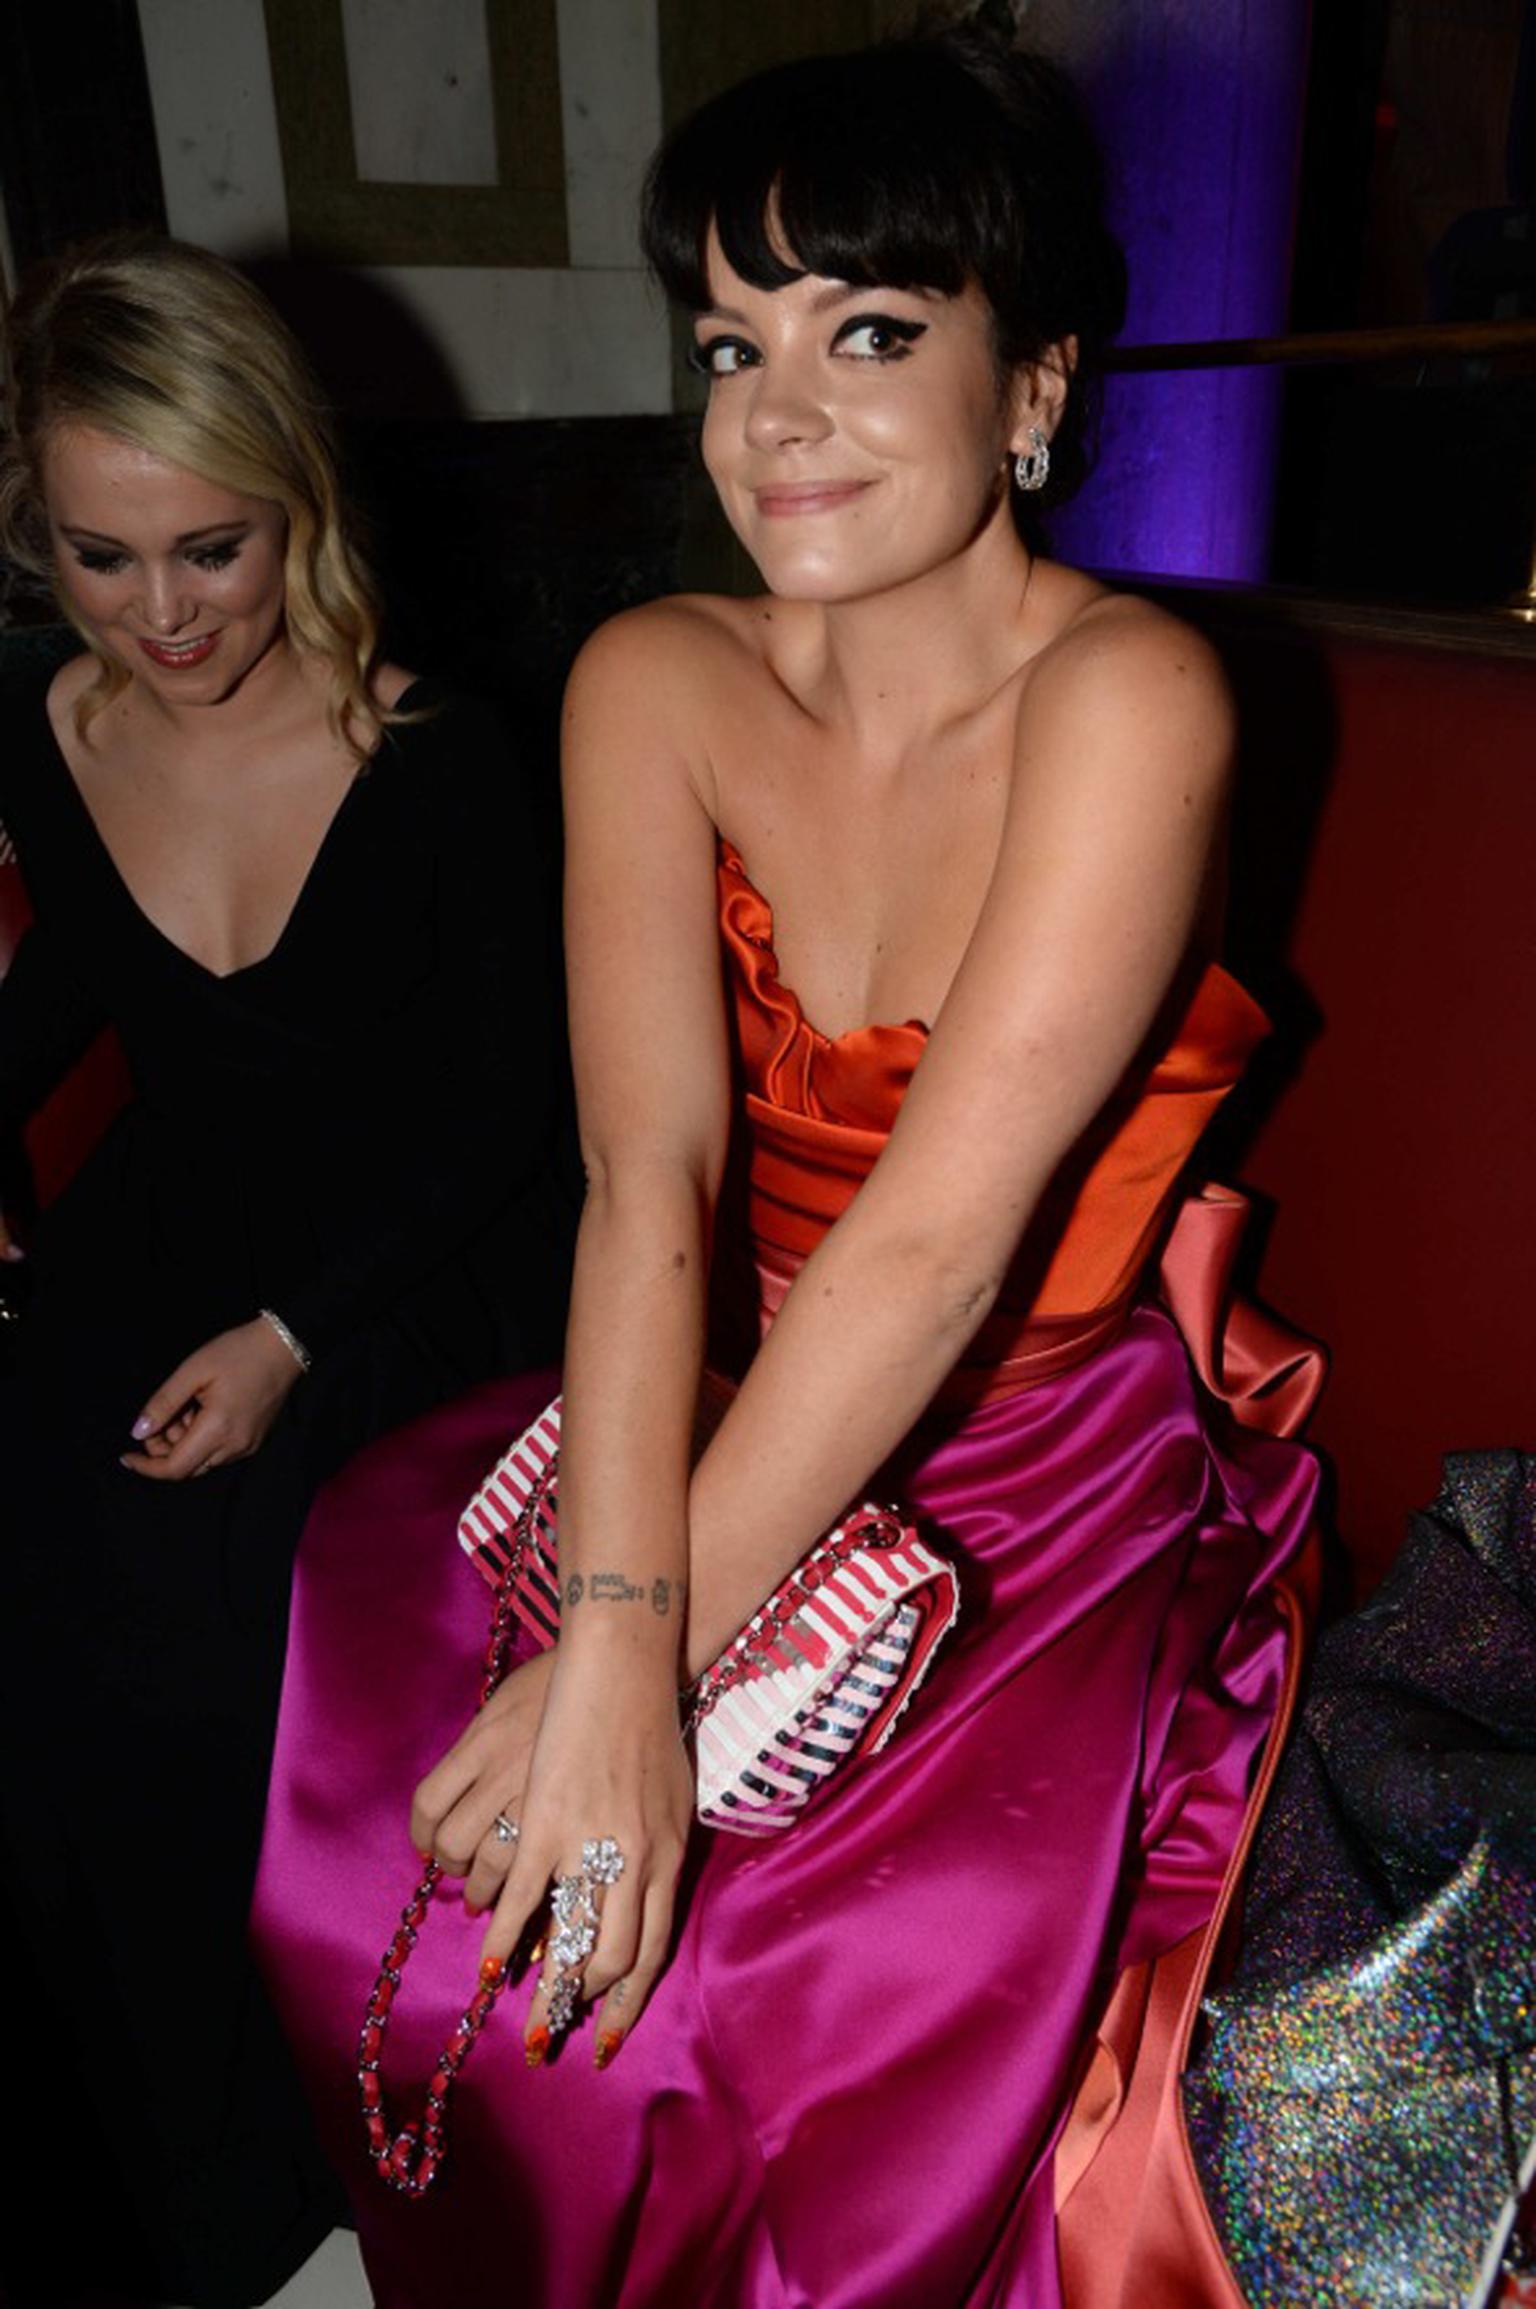 Lily Allen wore a Vivienne Westwood dress and a very cheeky smile to the BAFTAs 2014 as she showed off her David Morris London diamond ring, which ran the entire length of her finger